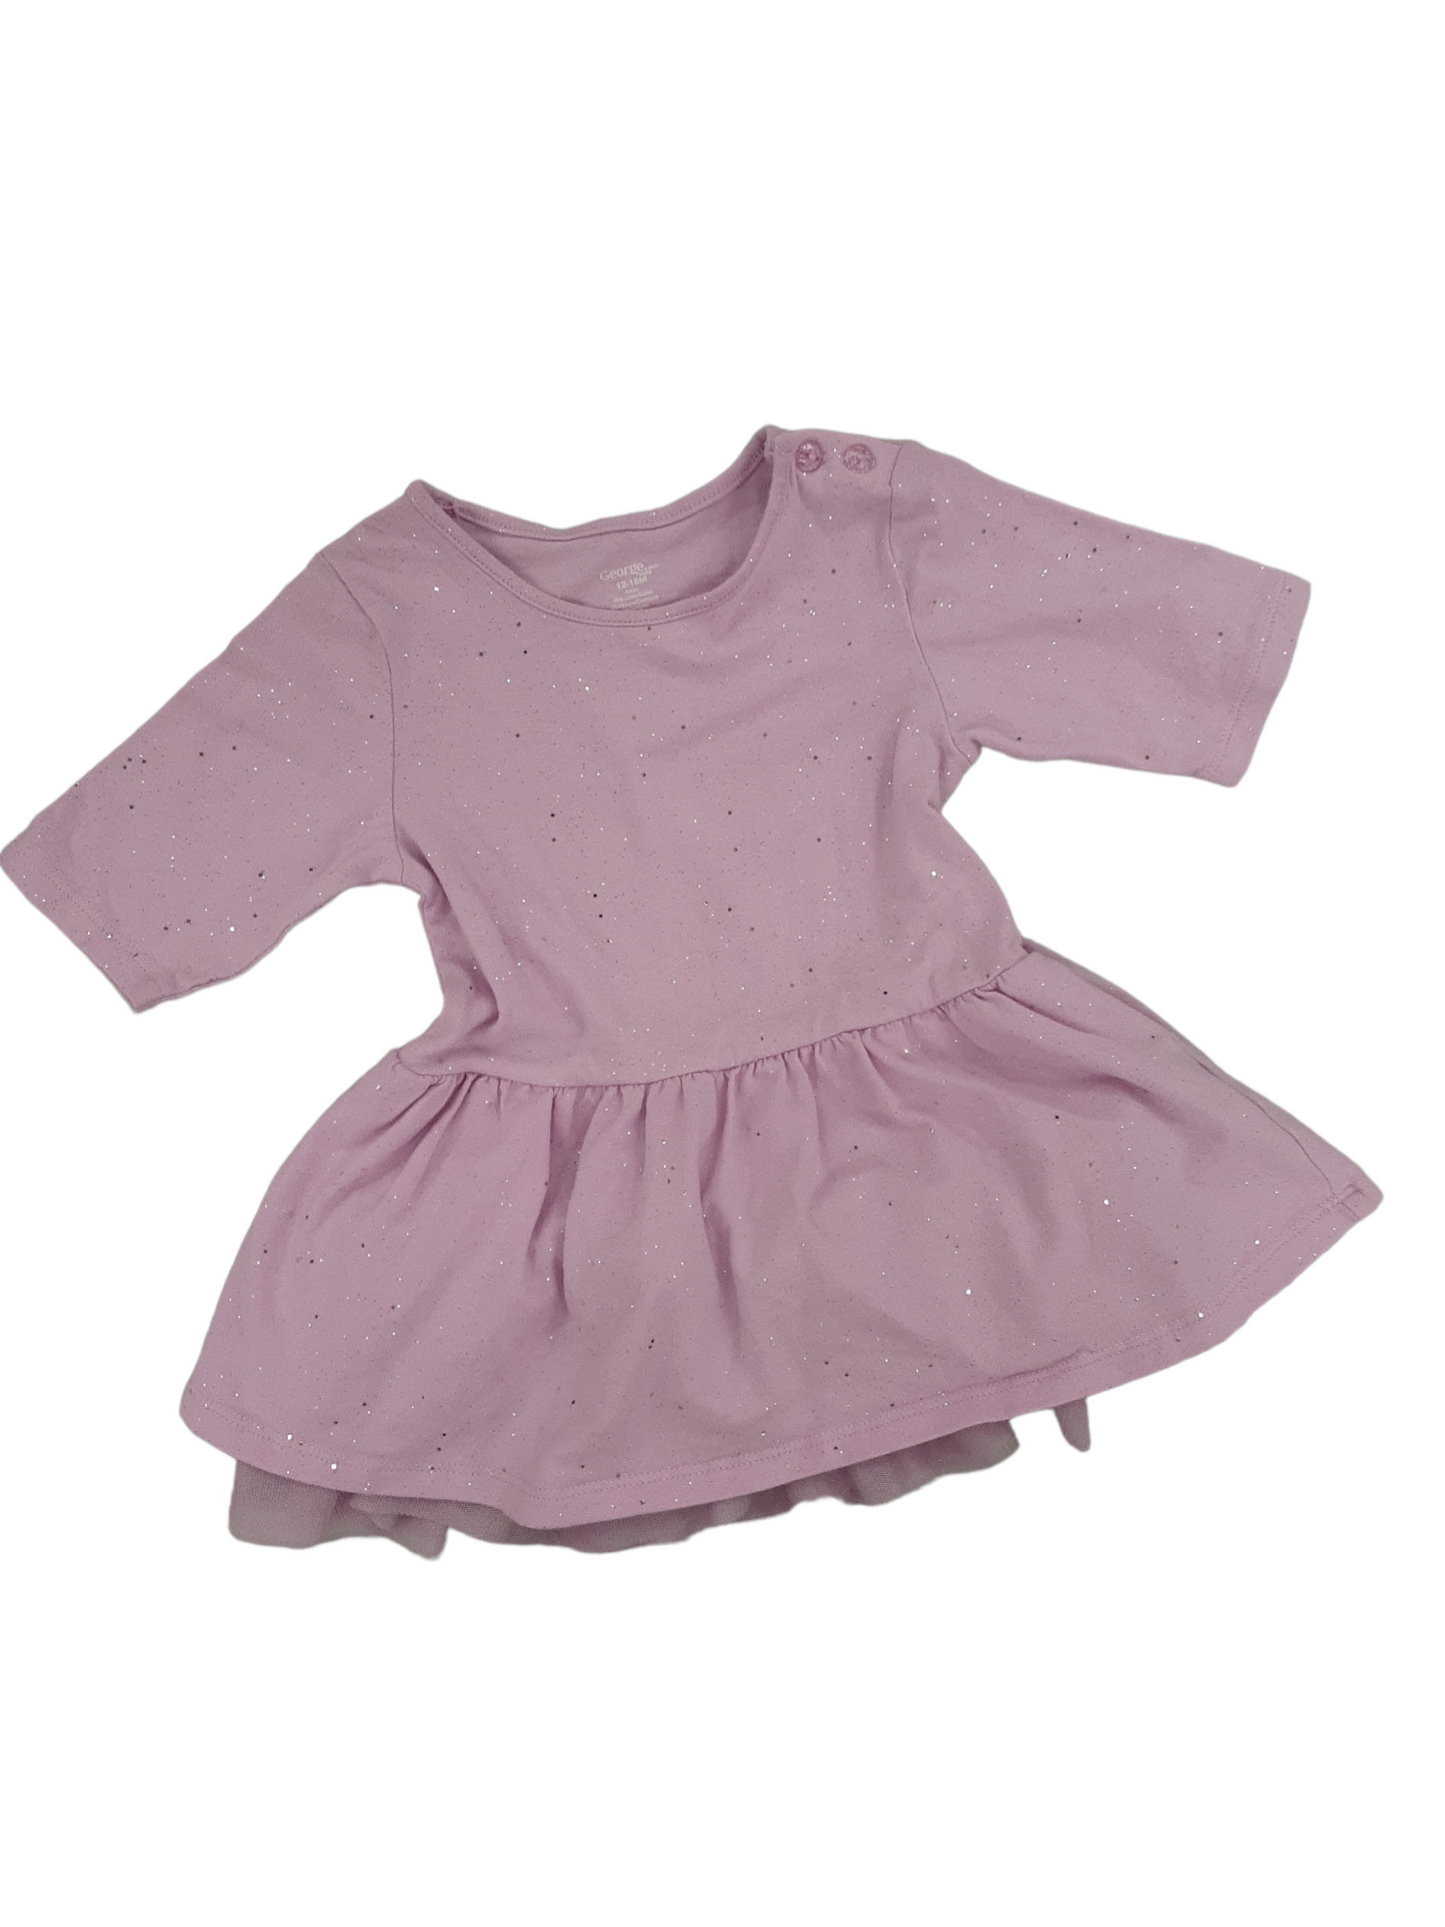 Glittery in pink dress size 12 to 18 months